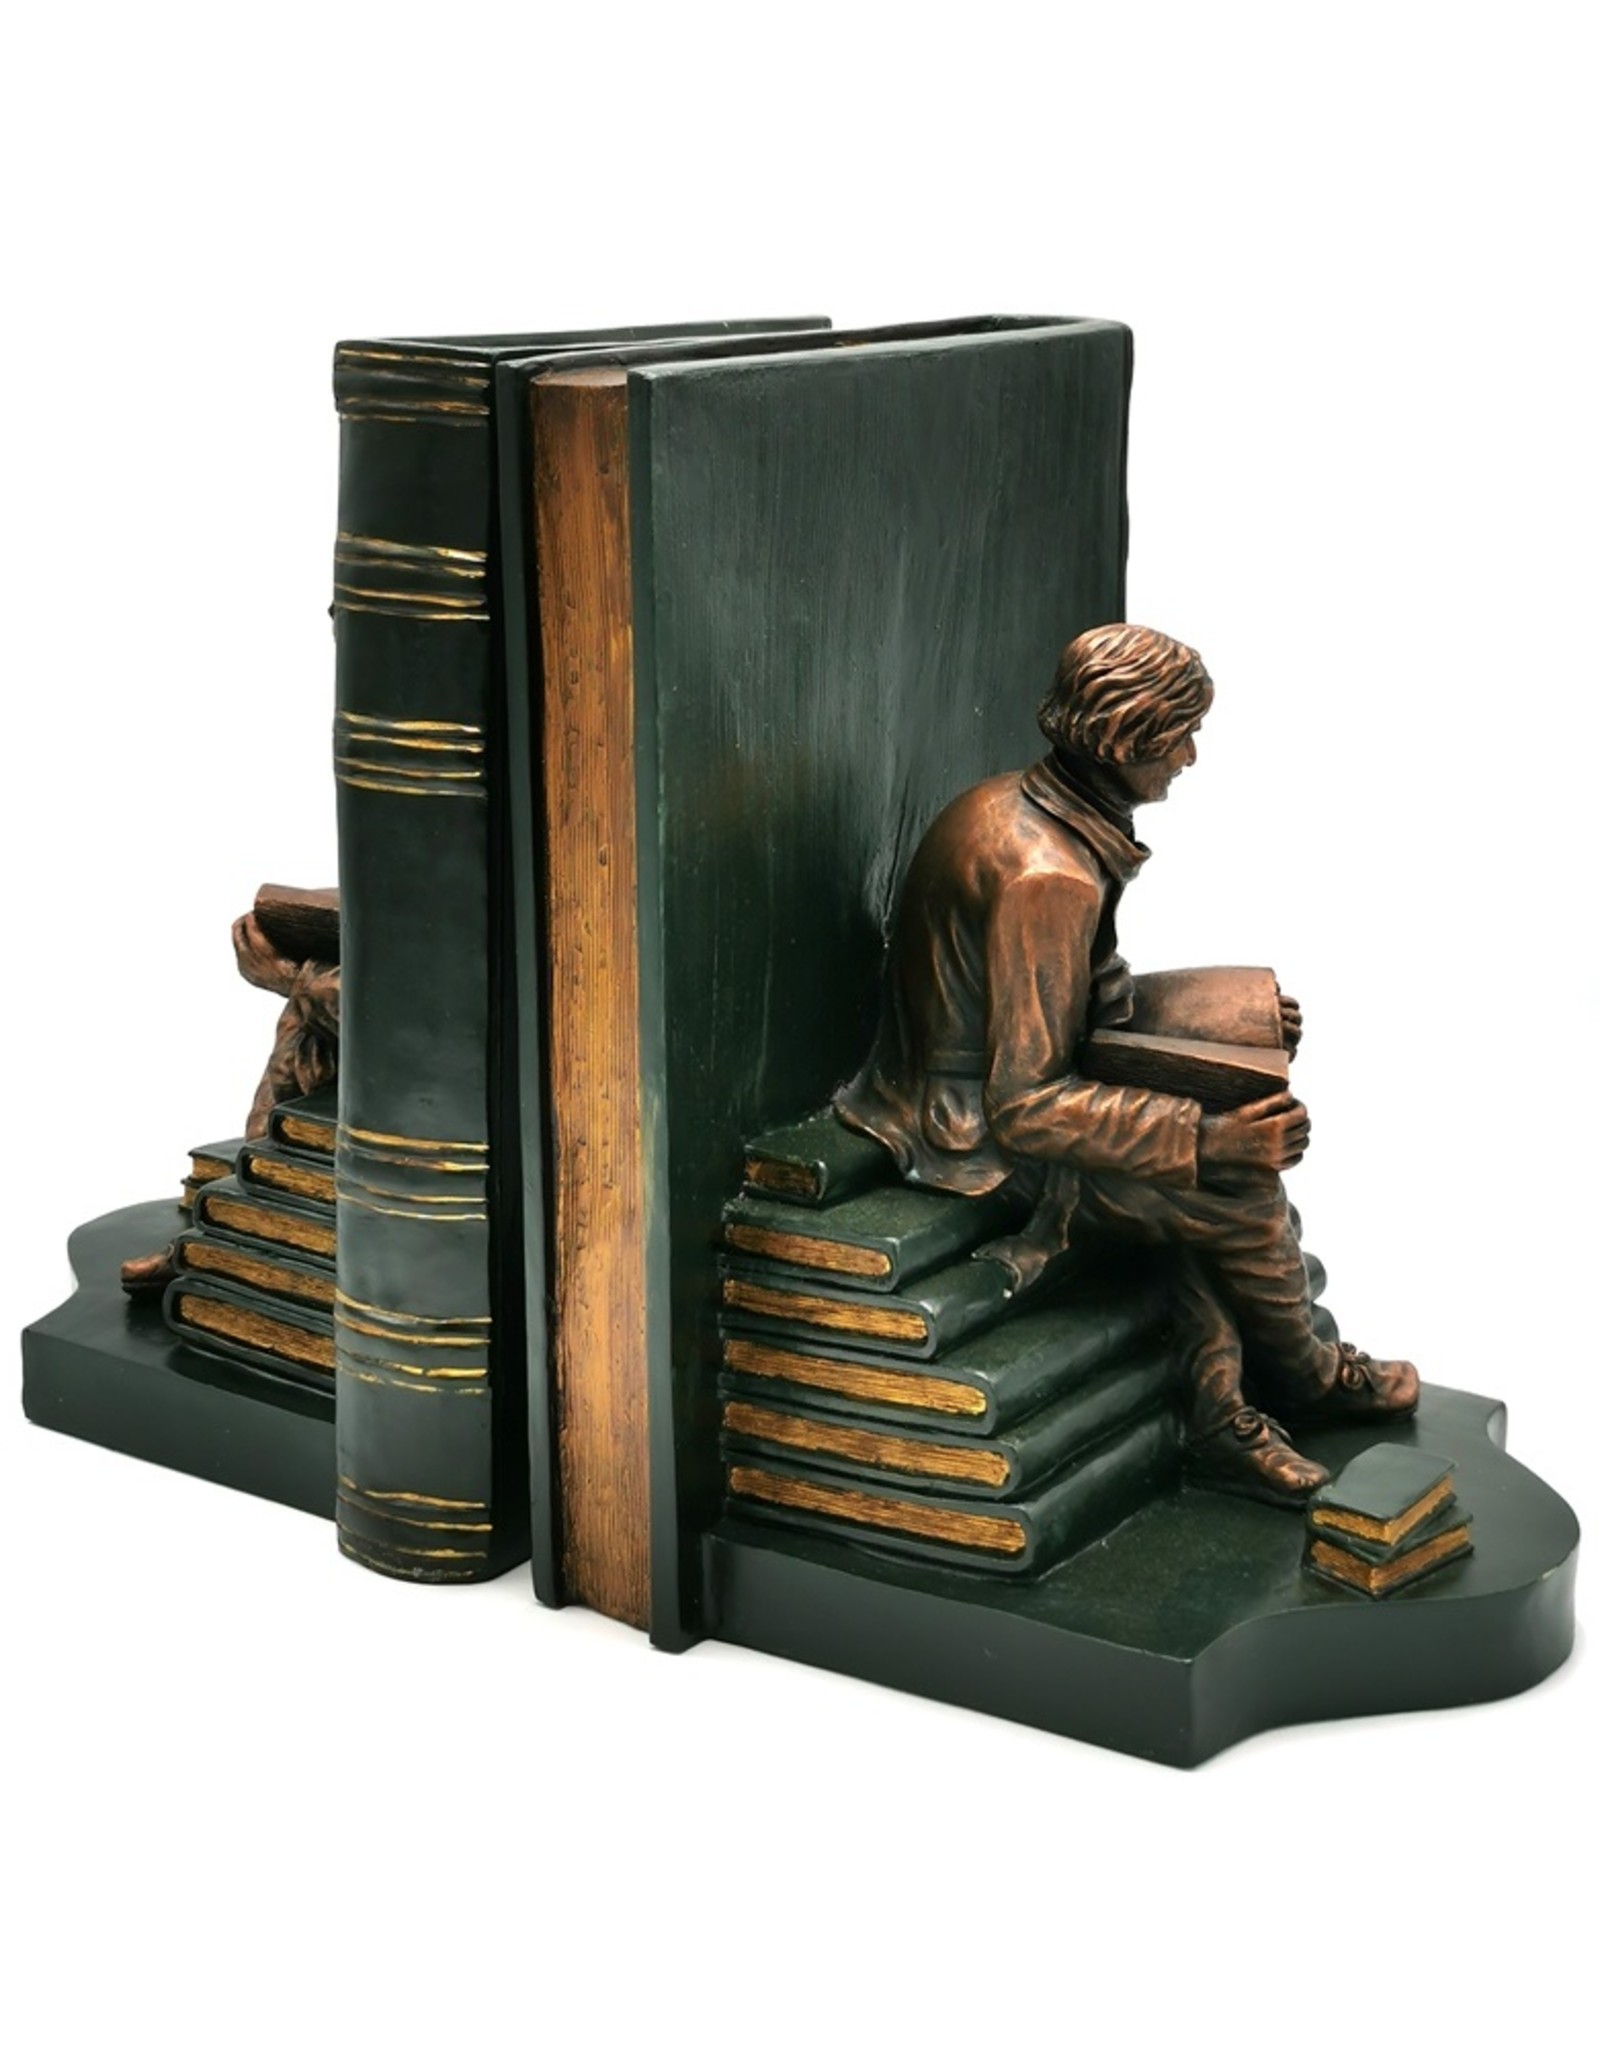 Barok Giftware & Lifestyle - Bookends Librarian Baroque style set of 2